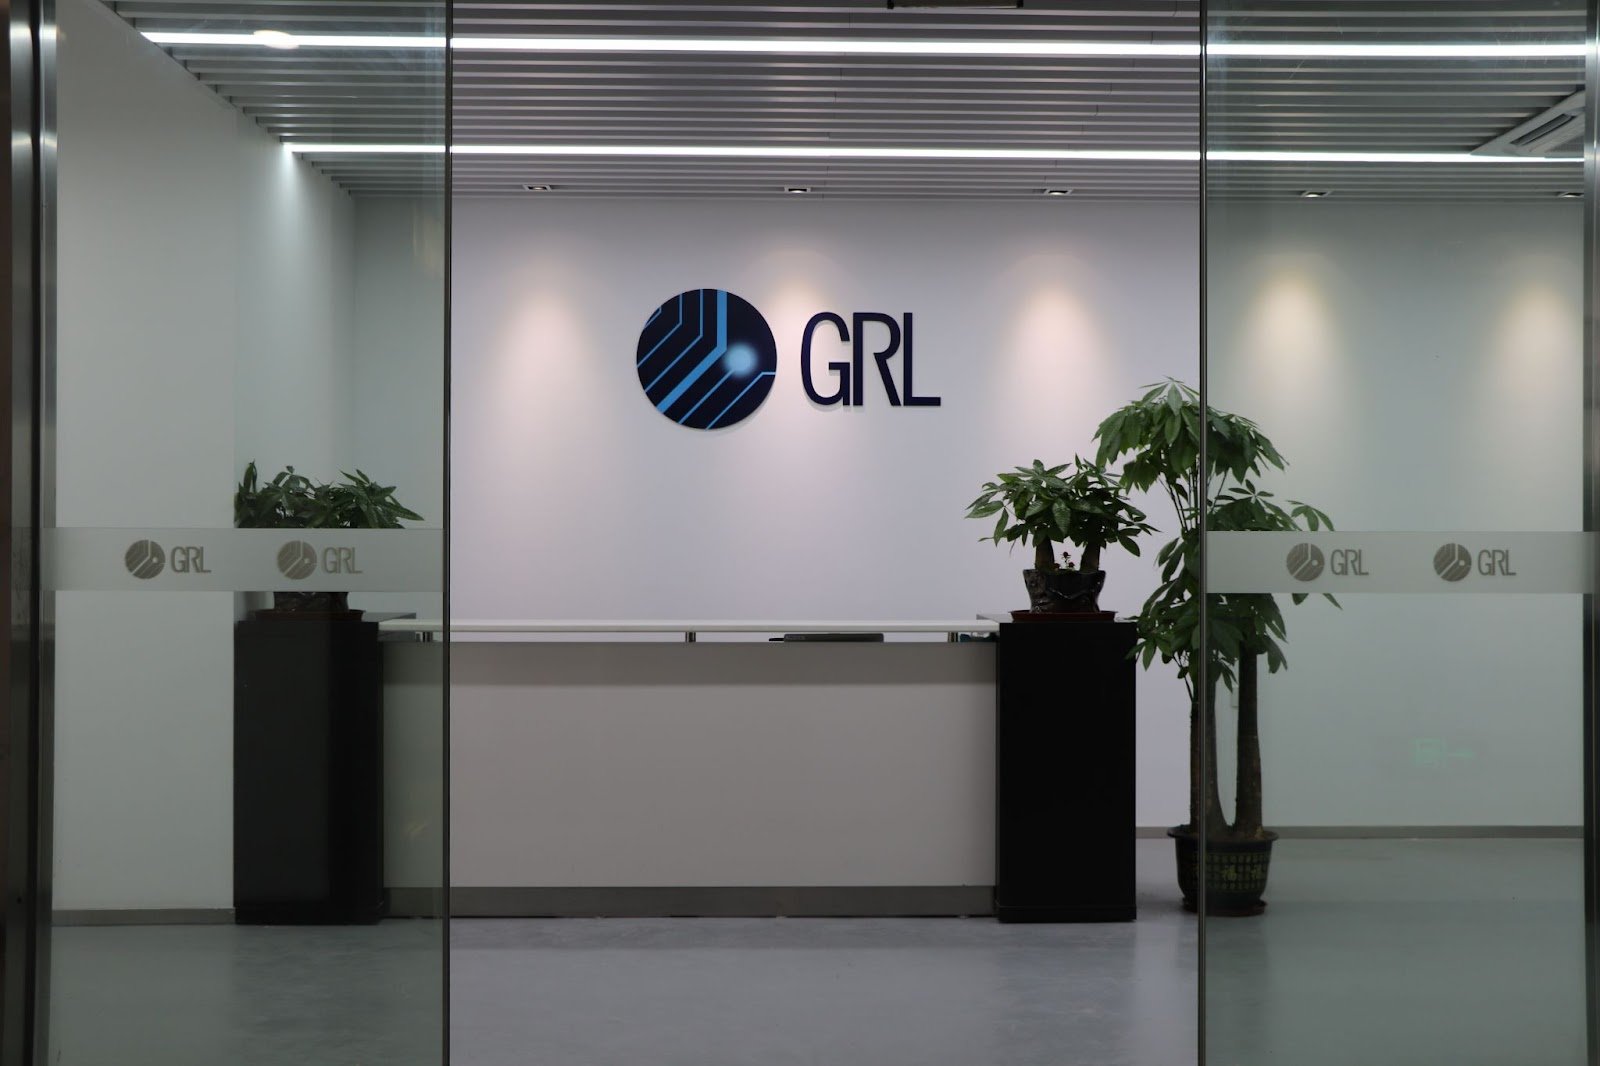 Granite river labs_GRL second China lab, Dongguan_Pearl River Delta electronics ecosystem_logo certification testing for HDMI Premium cable